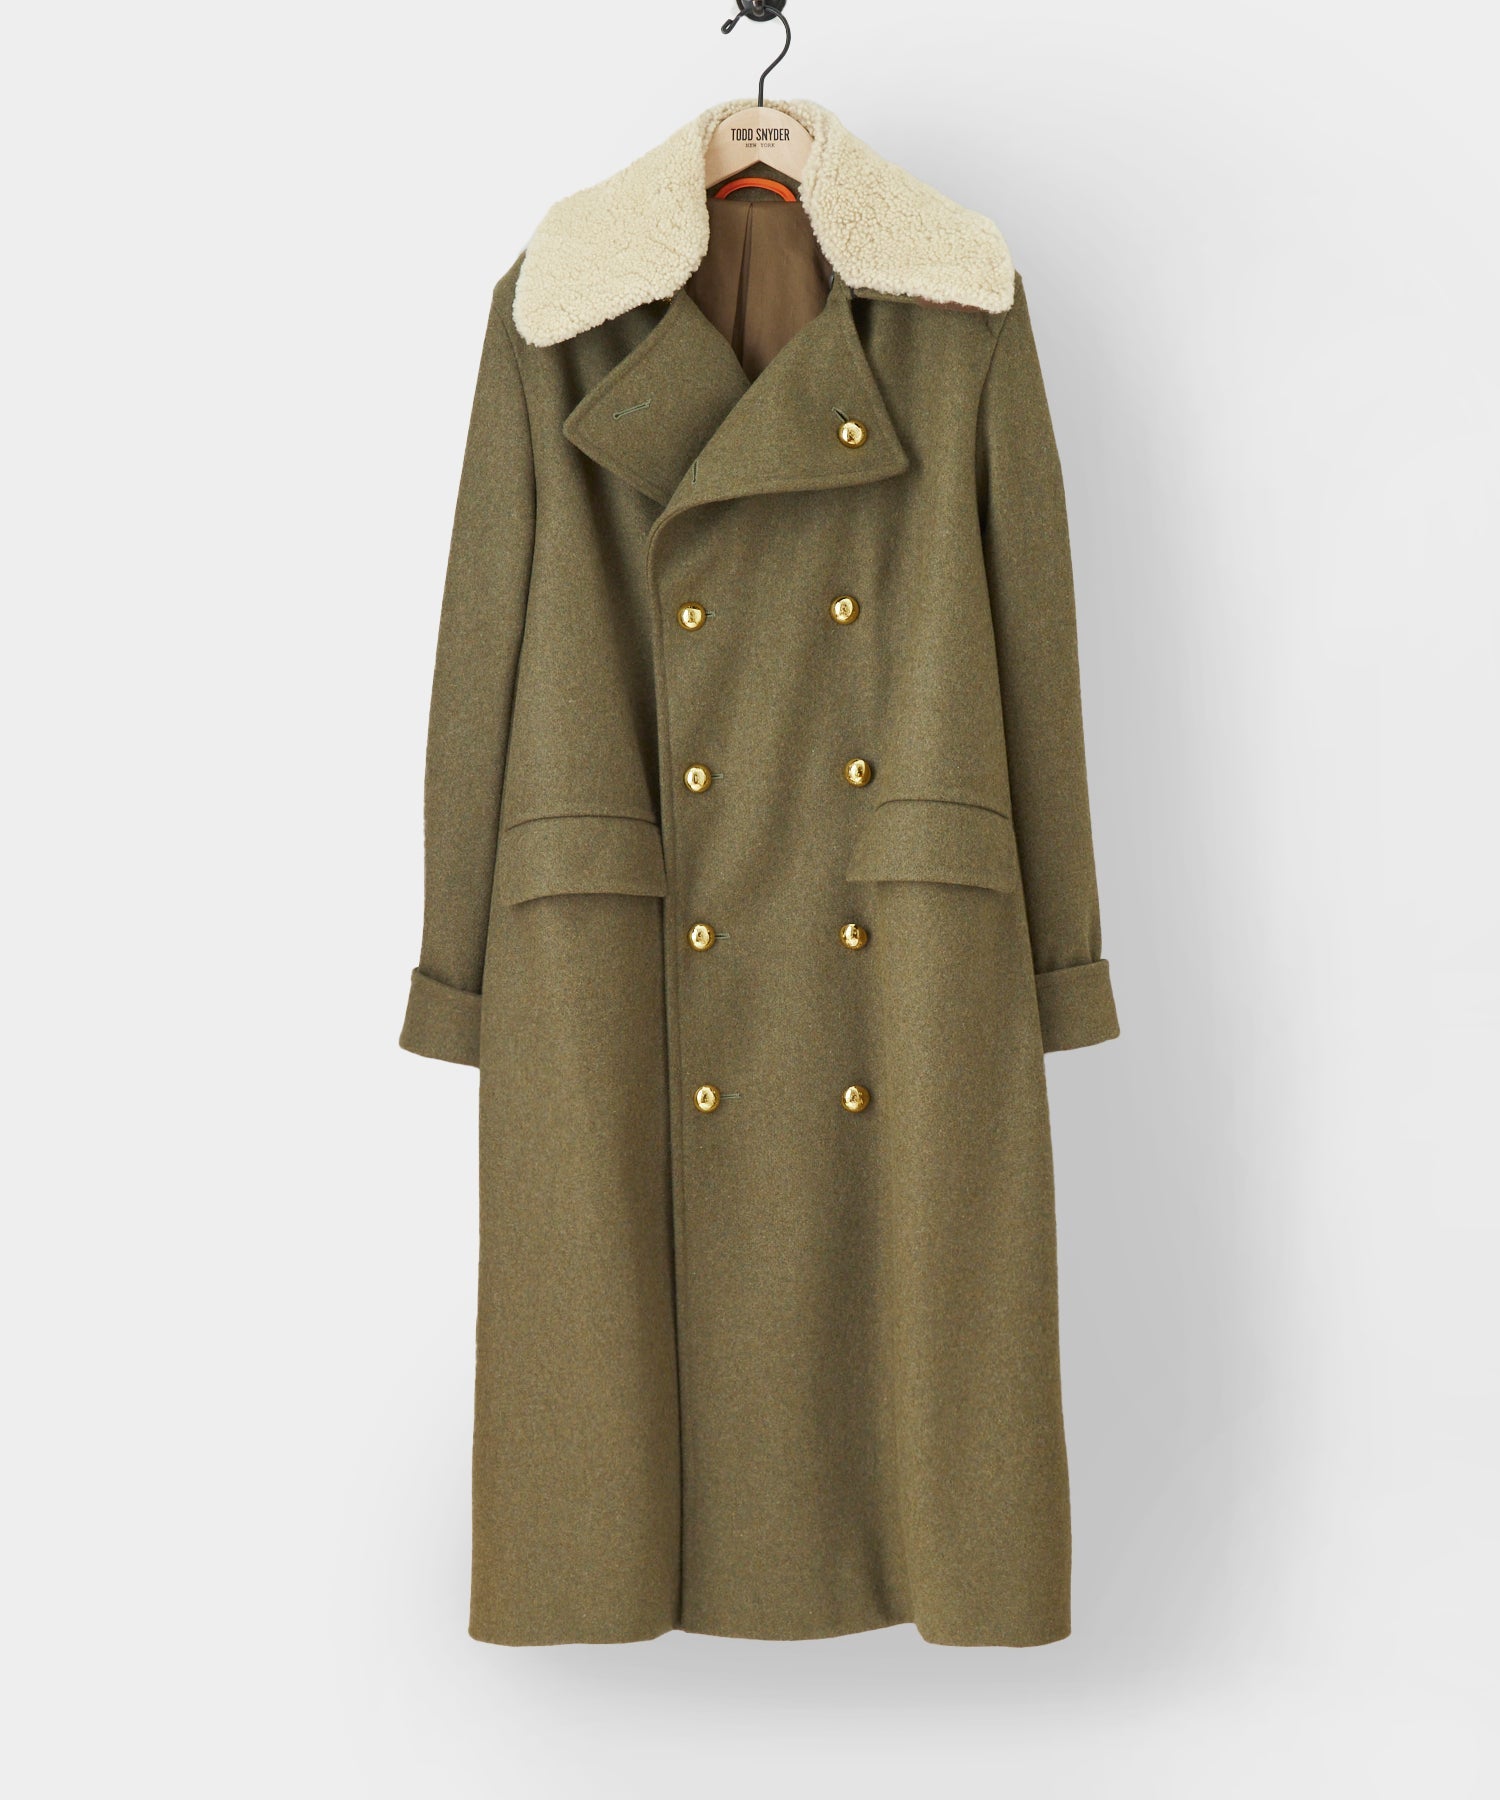 Todd Snyder X Private White DB Great Coat with Removable Shearling Top Collar